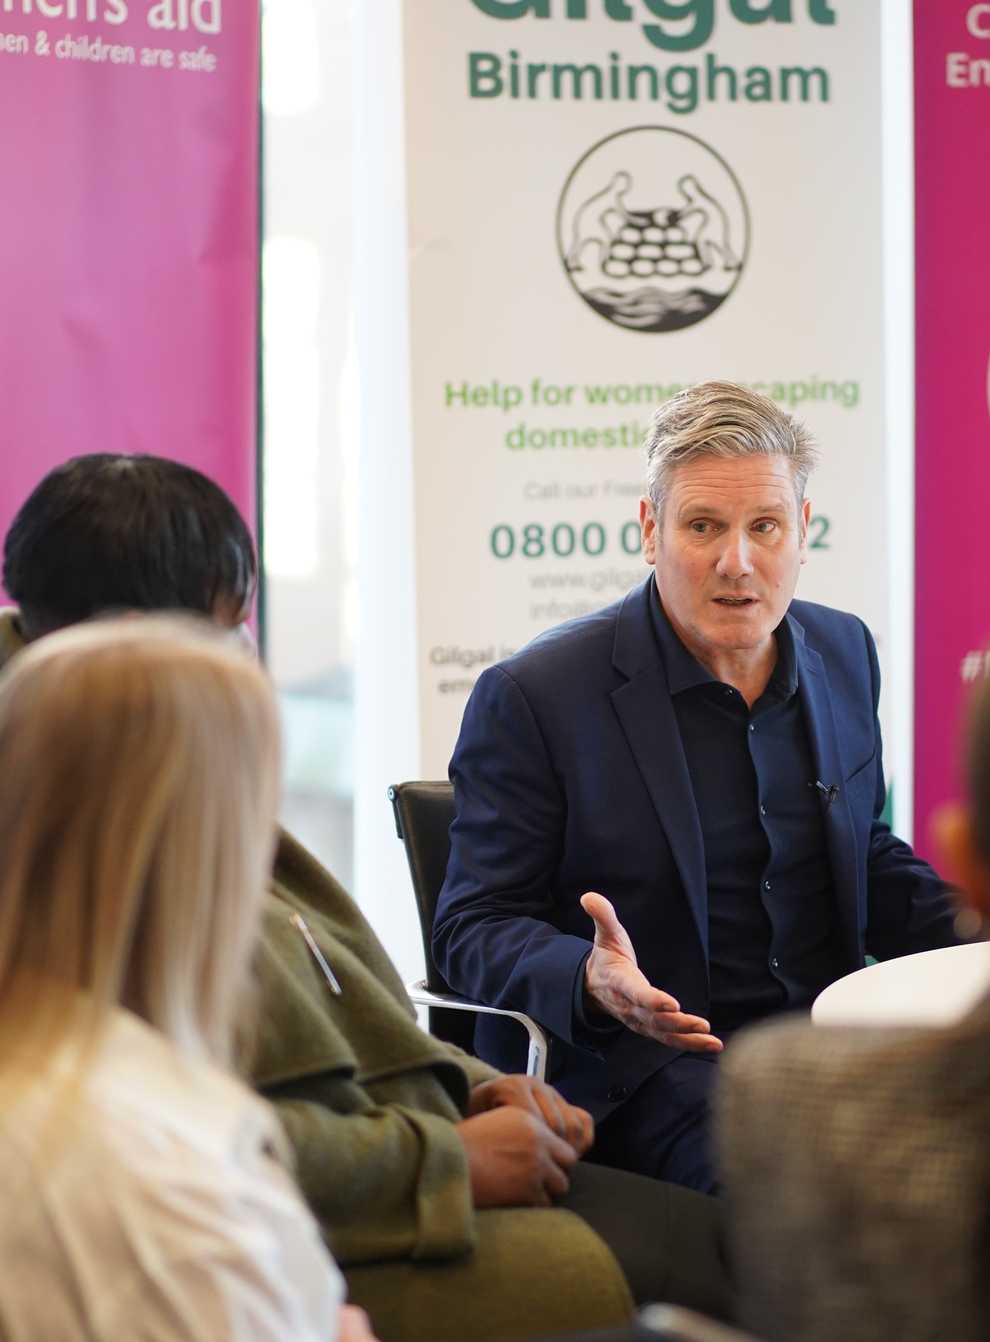 Labour leader Sir Keir Starmer during a visit to Birmingham, meeting advocates for the Women’s Aid Federation (Stefan Rousseau/PA)